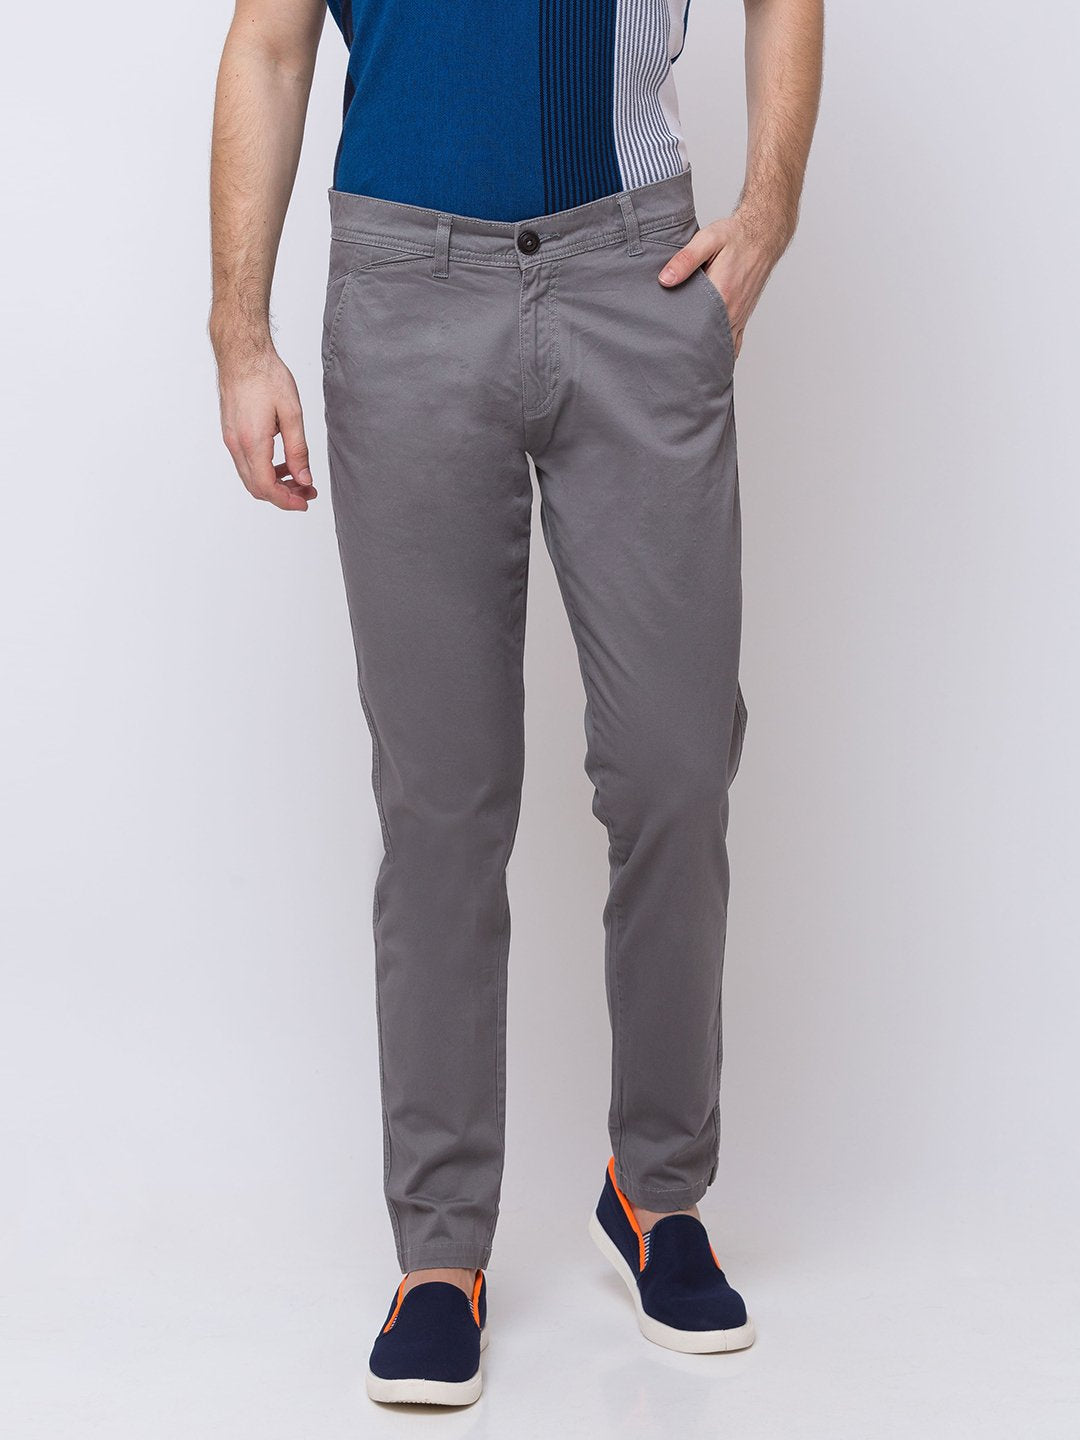 Status Quo |Grey Solid Open Bottom Trousers - M, L, XL, XXL